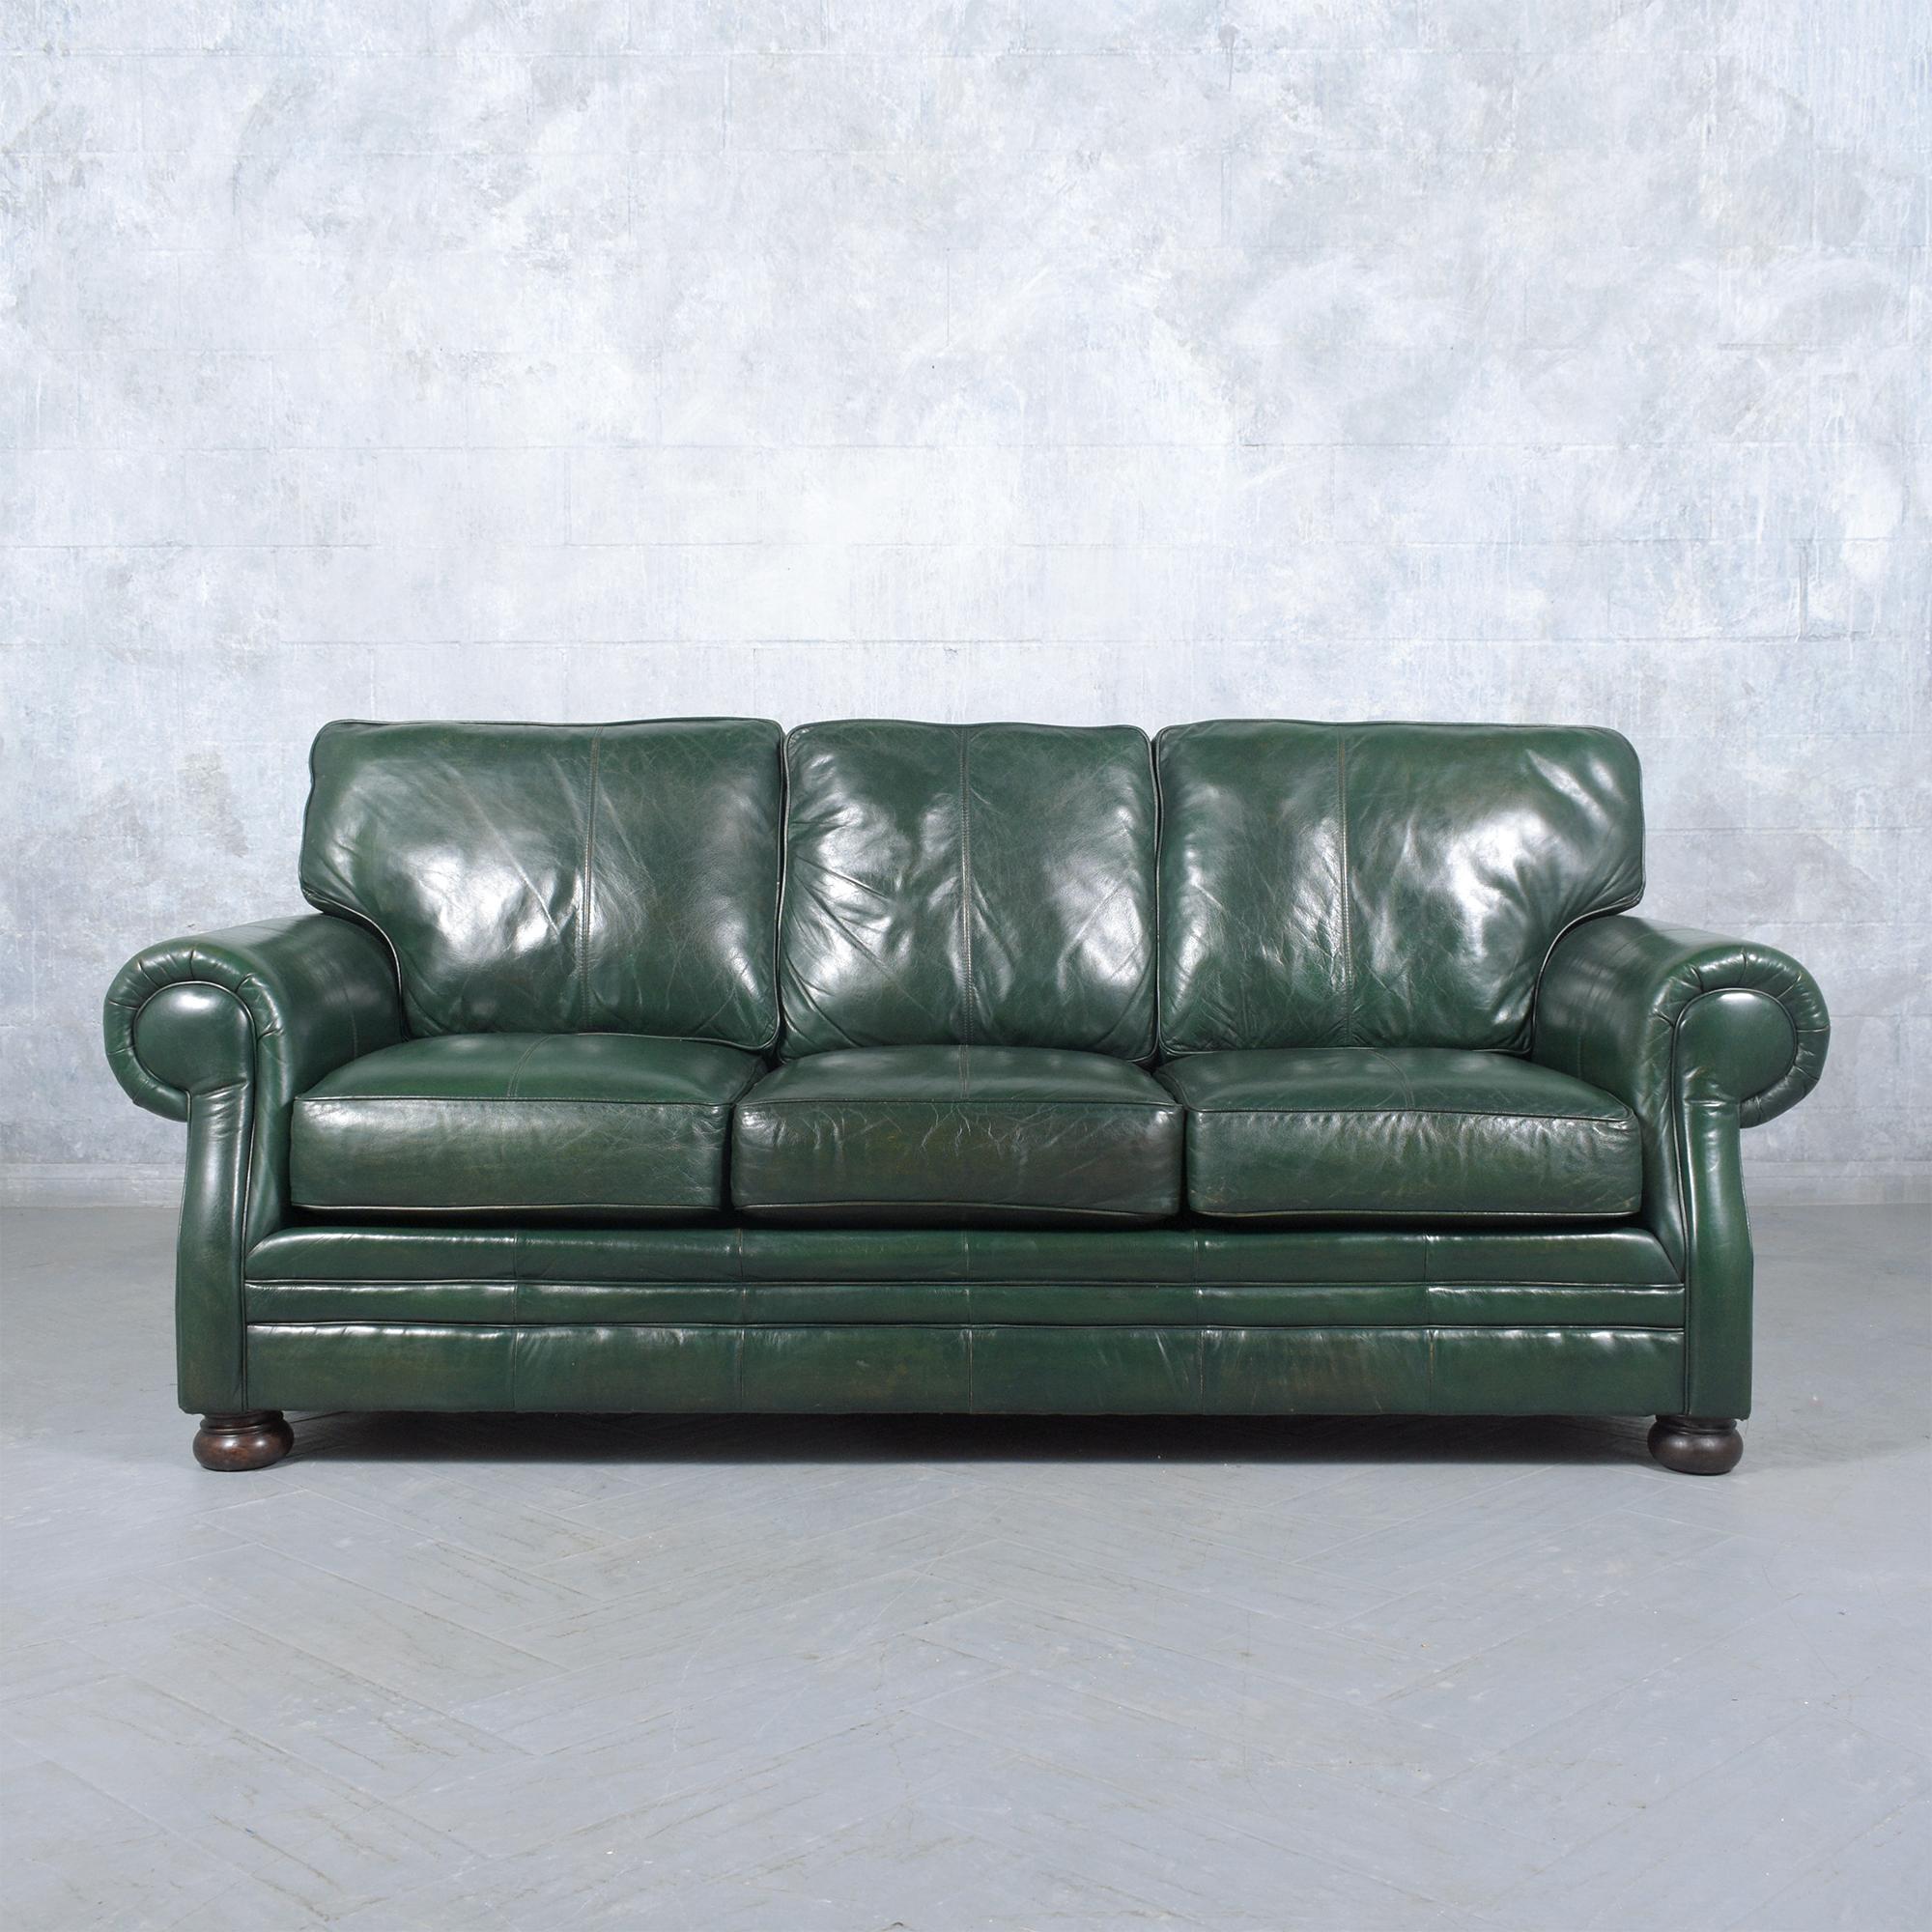 Step back into the 1980s with this extraordinary vintage sofa, beautifully crafted from leather and meticulously restored by our team of professional expert craftsmen. This sofa features a sleek, custom dark green dye, sealed and polished to develop